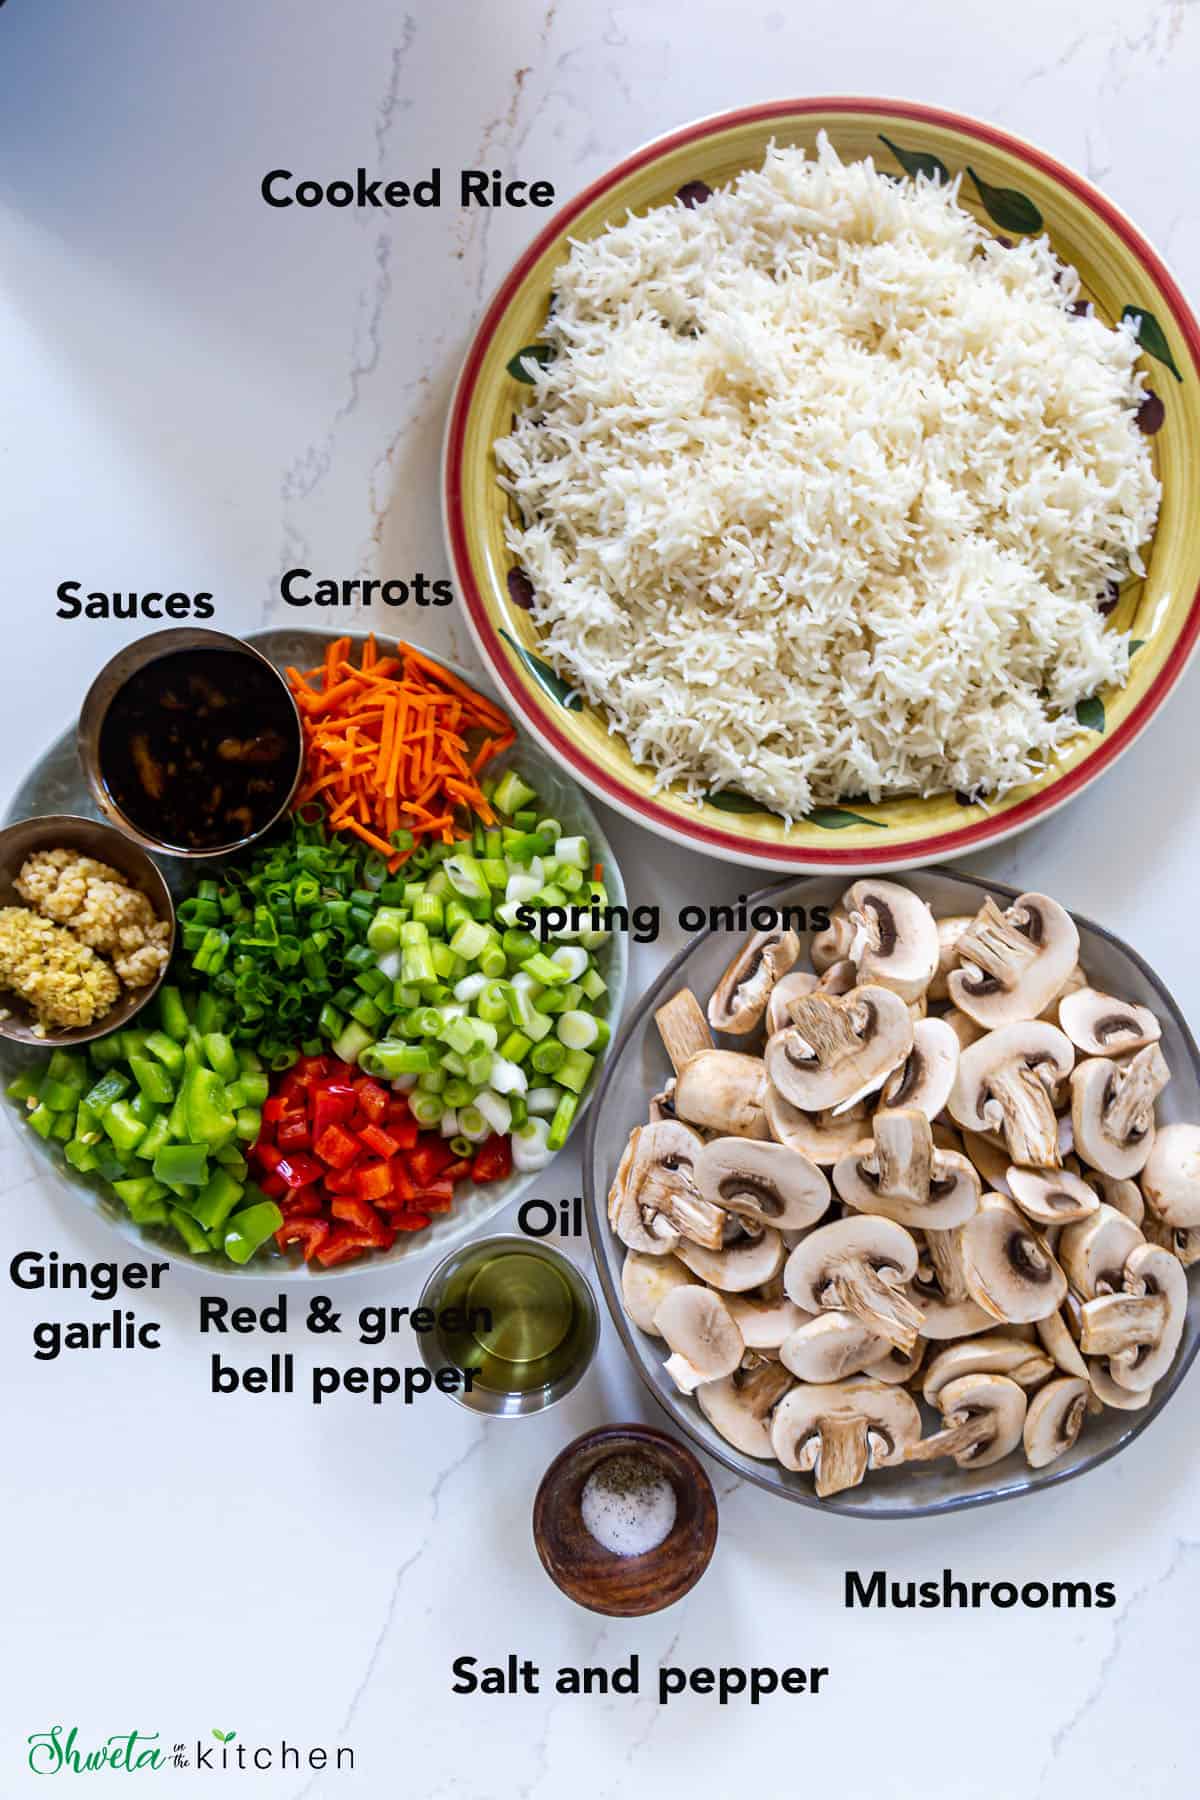 Ingredients for Mushroom Fried Rice laid out on white surface in bowls